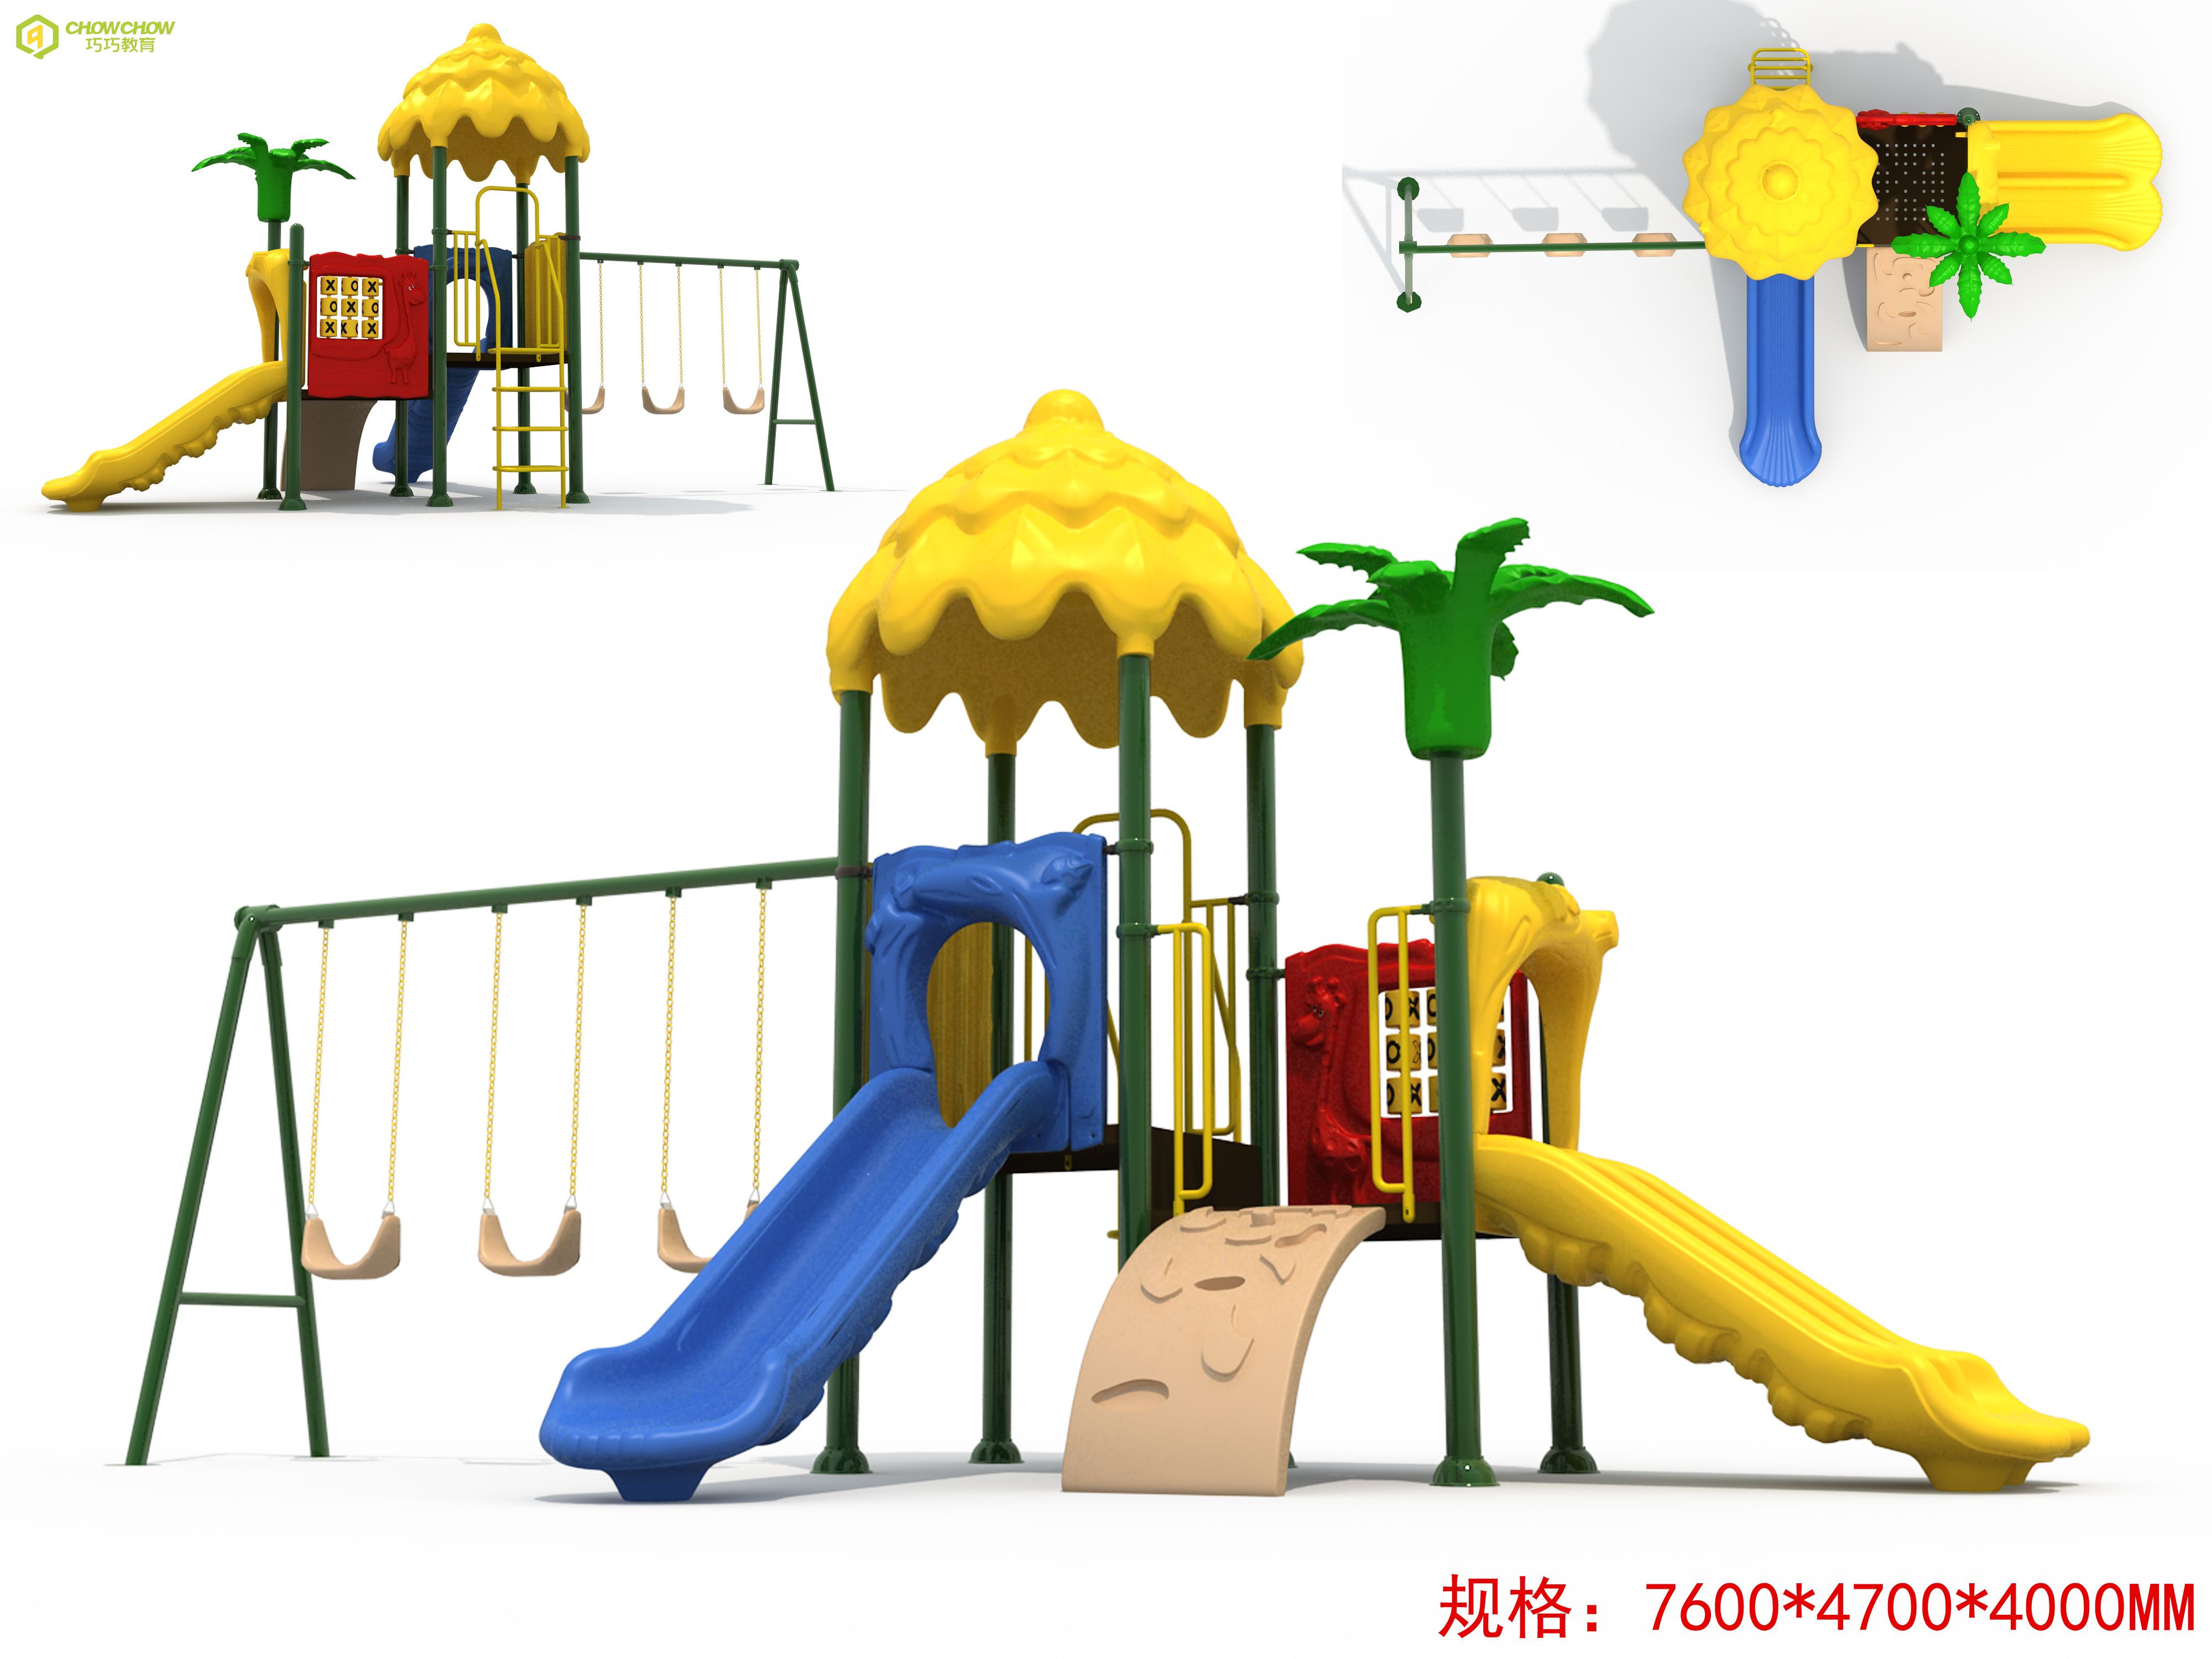 Commercial Party Rental Equipment Playground Kids Neutral Outdoor Playground Equipment Plays For Children'S Parties